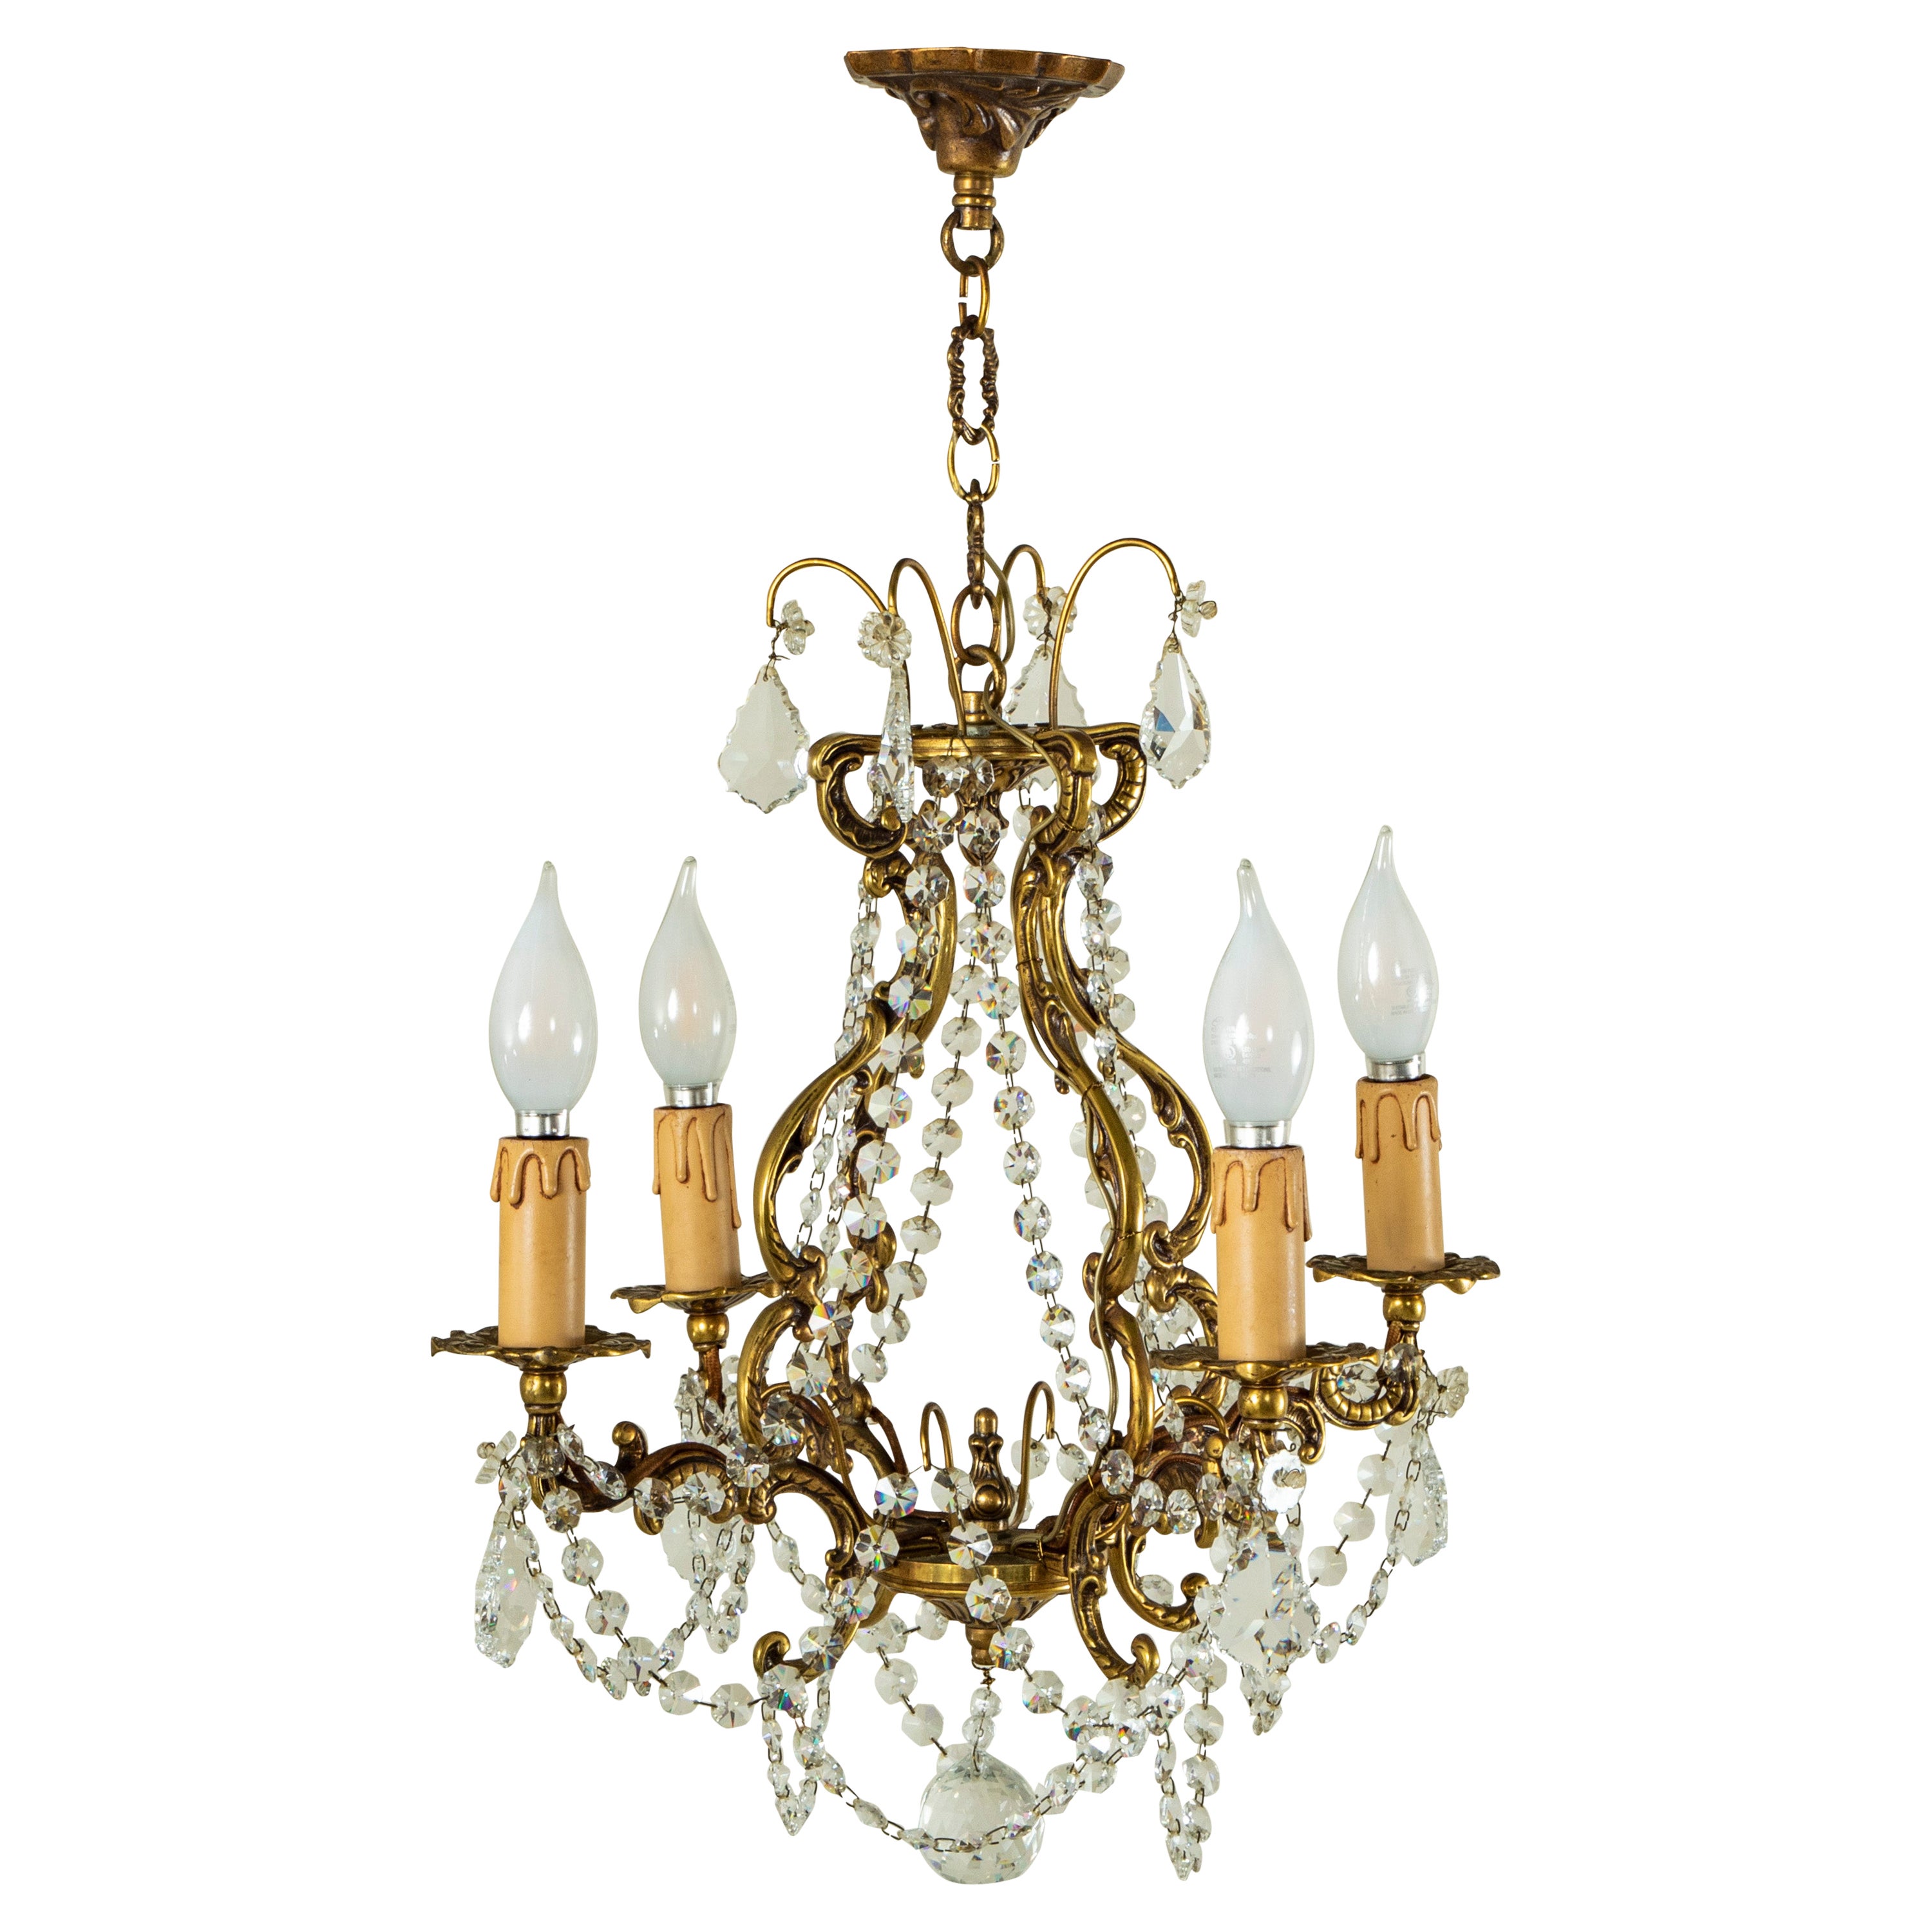 Early 20th Century Small Scale French Bronze and Strass Crystal Chandelier